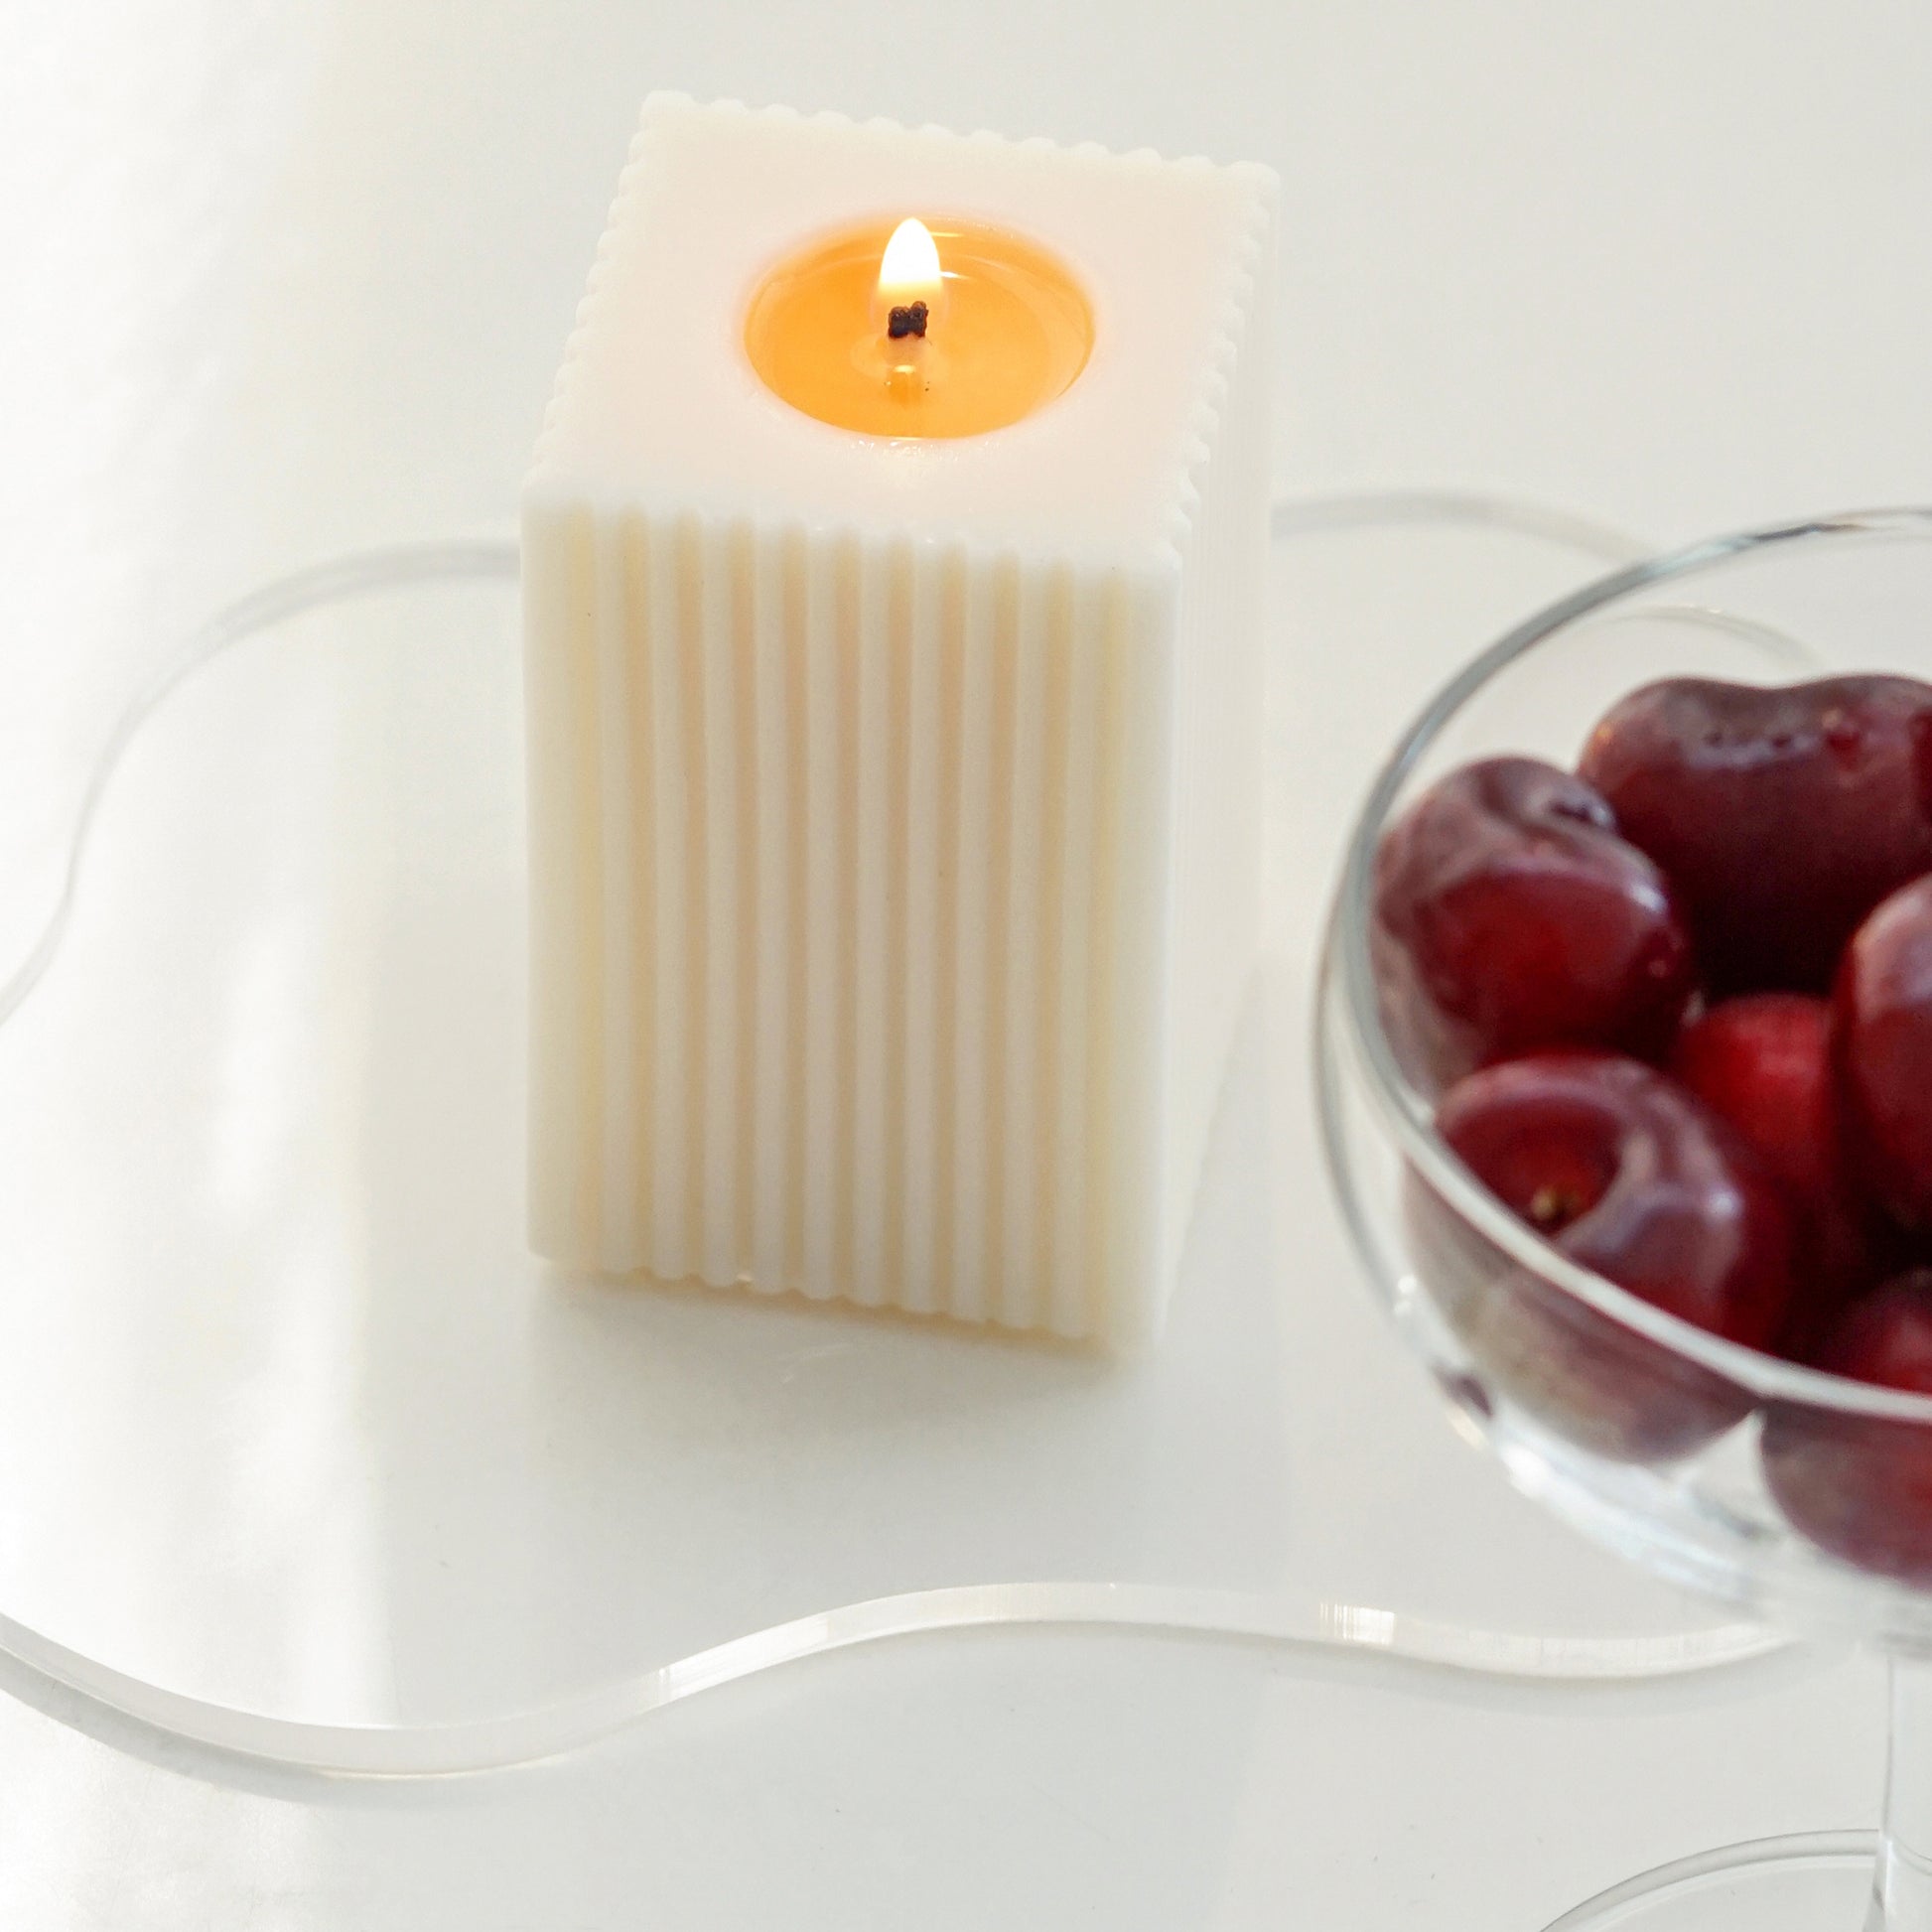 a lit ribbed rectangular soy pillar candle on irregular shape wavy acrylic coaster next to a coupe glass filled with red cherries